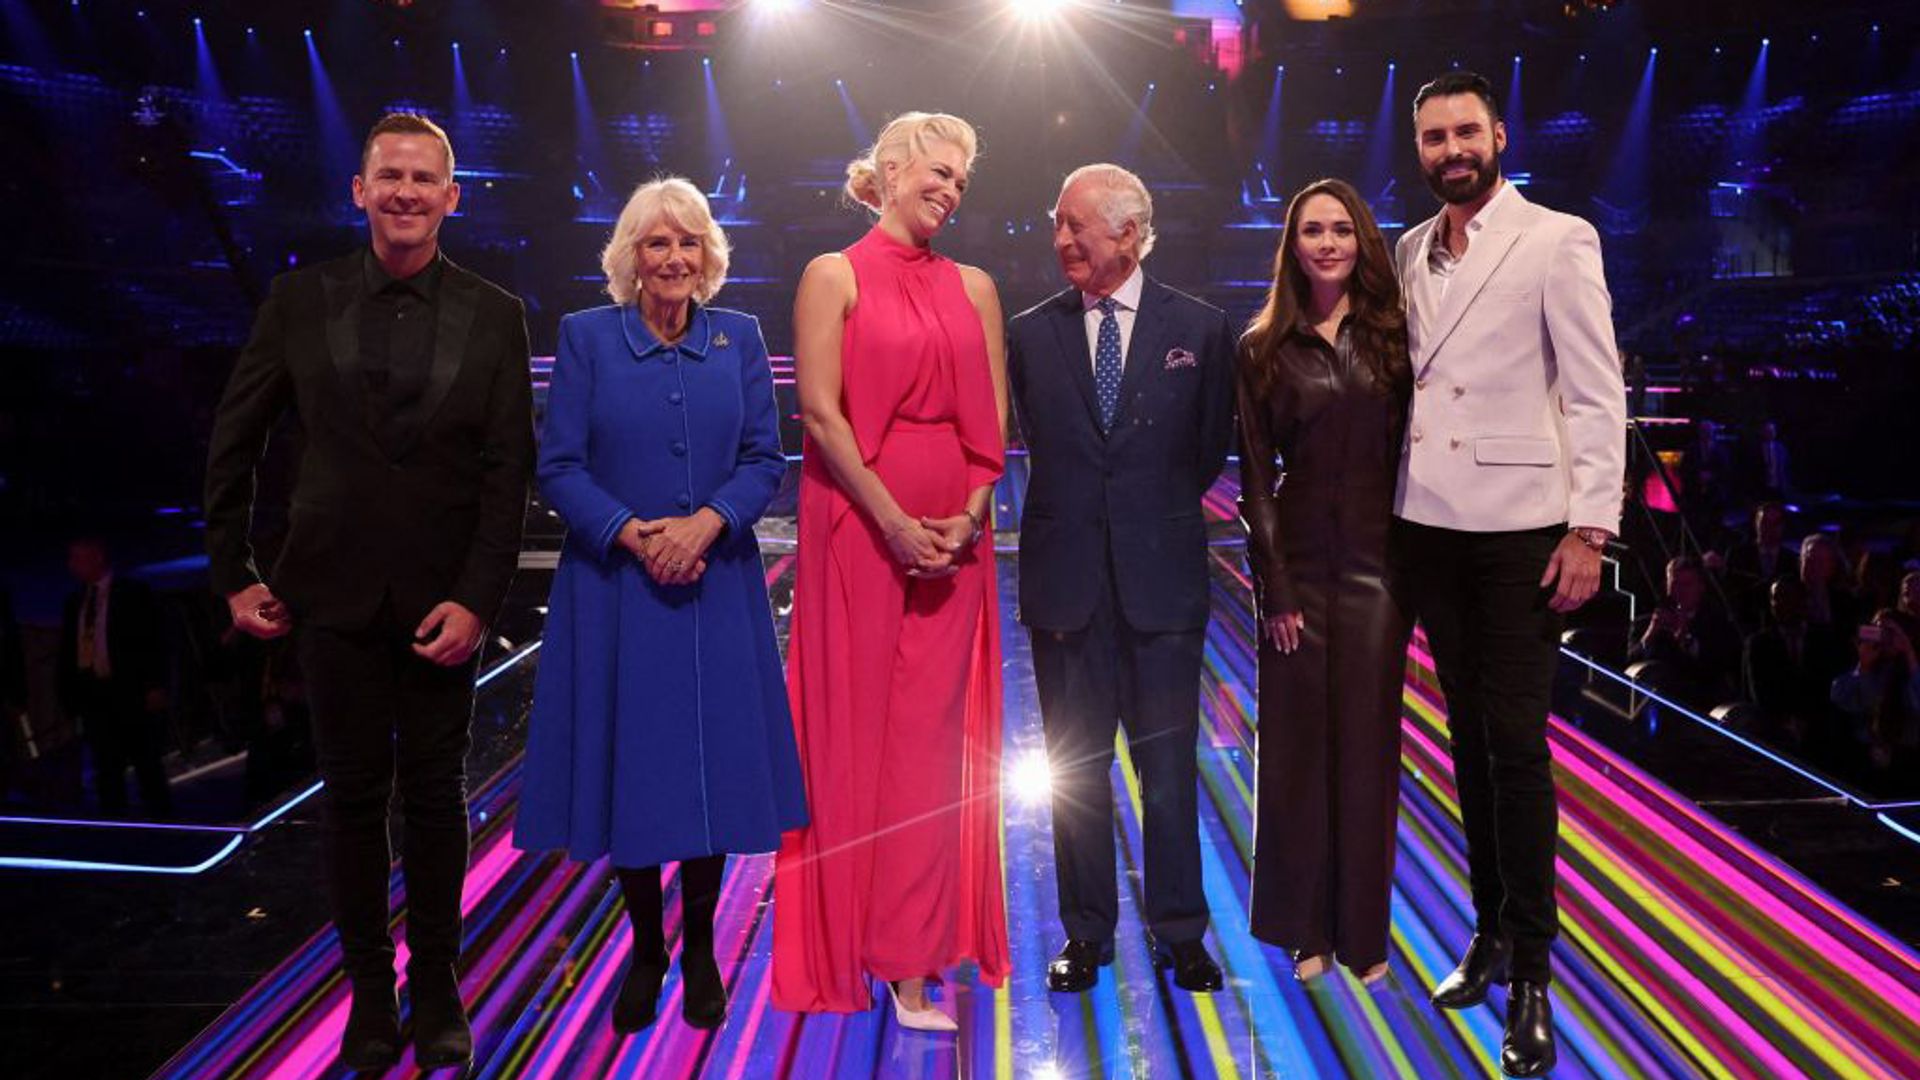 Rylan poses for a photo with King Charles, Queen Camilla, Scott Mills, Hannah Waddingham and Julia Sanina 